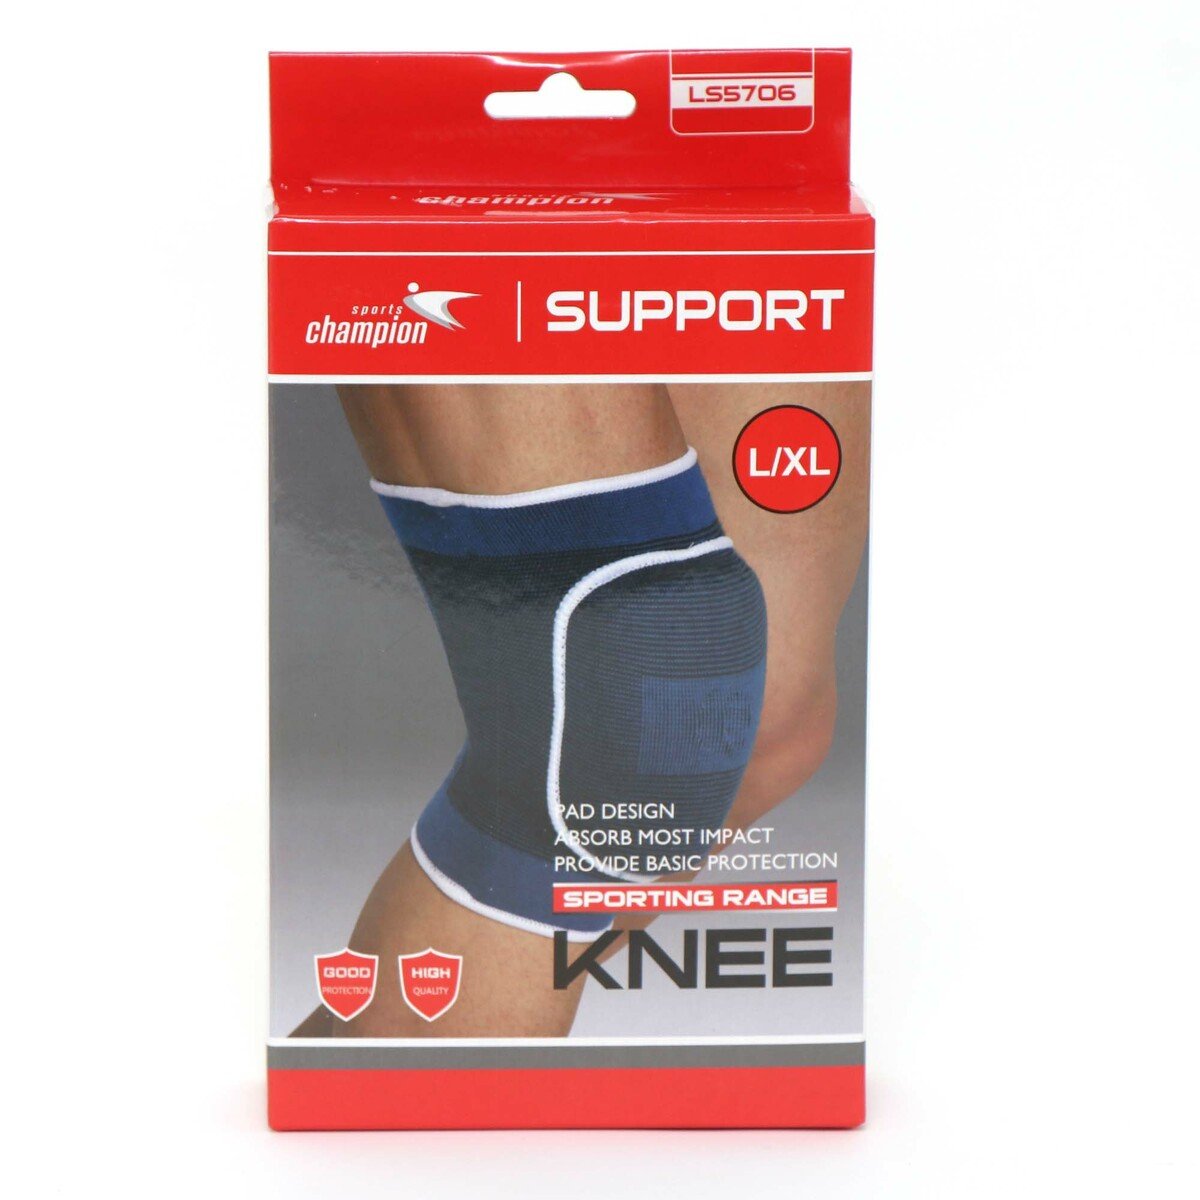 Sports Champion Knee Support LS5706 Large